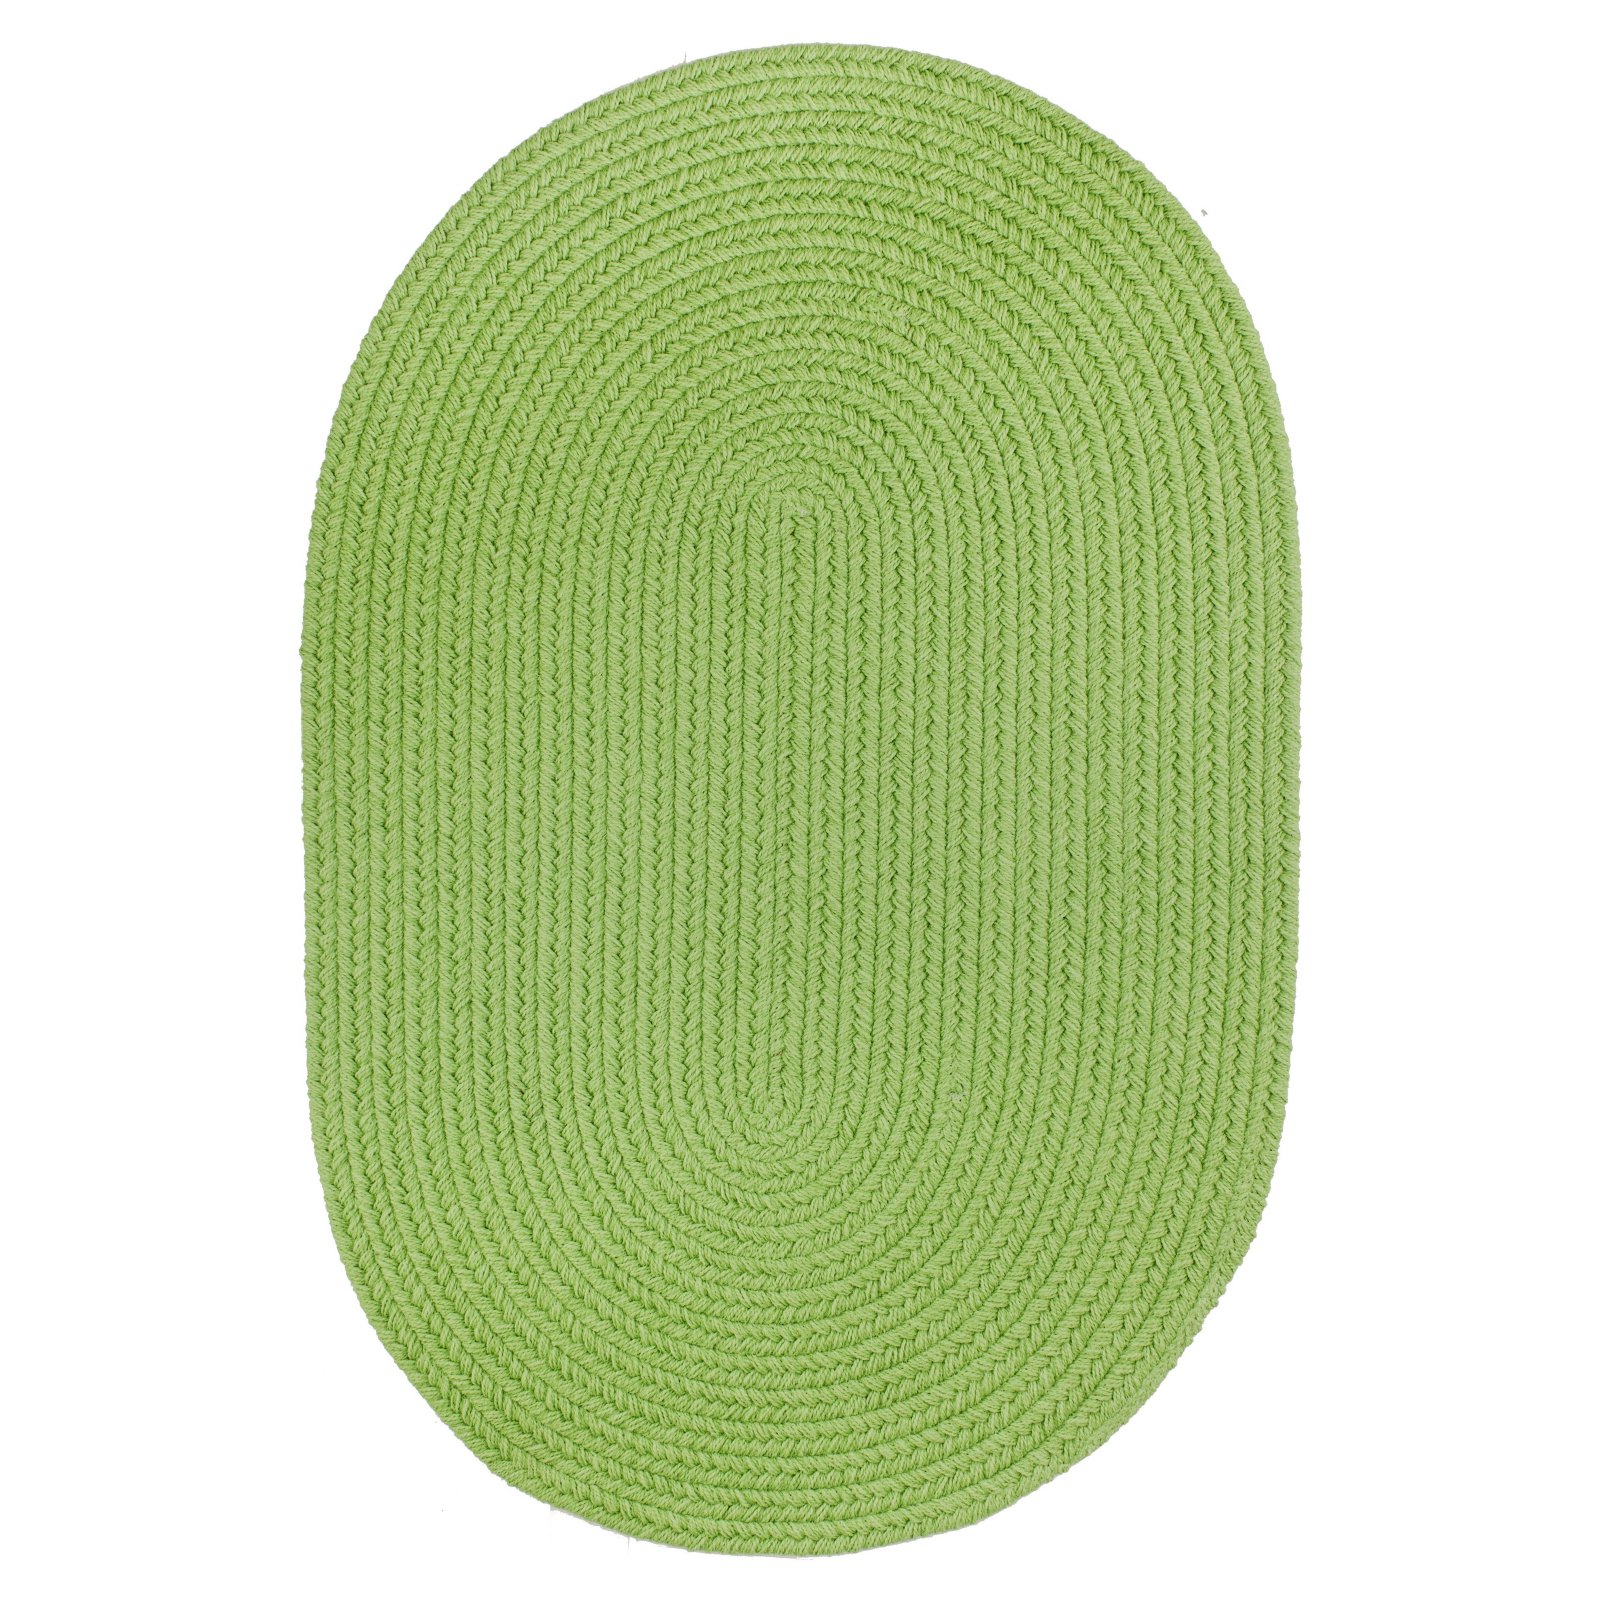 Rhody Rug Happy Braids Solid Lime 4' Round - image 1 of 2